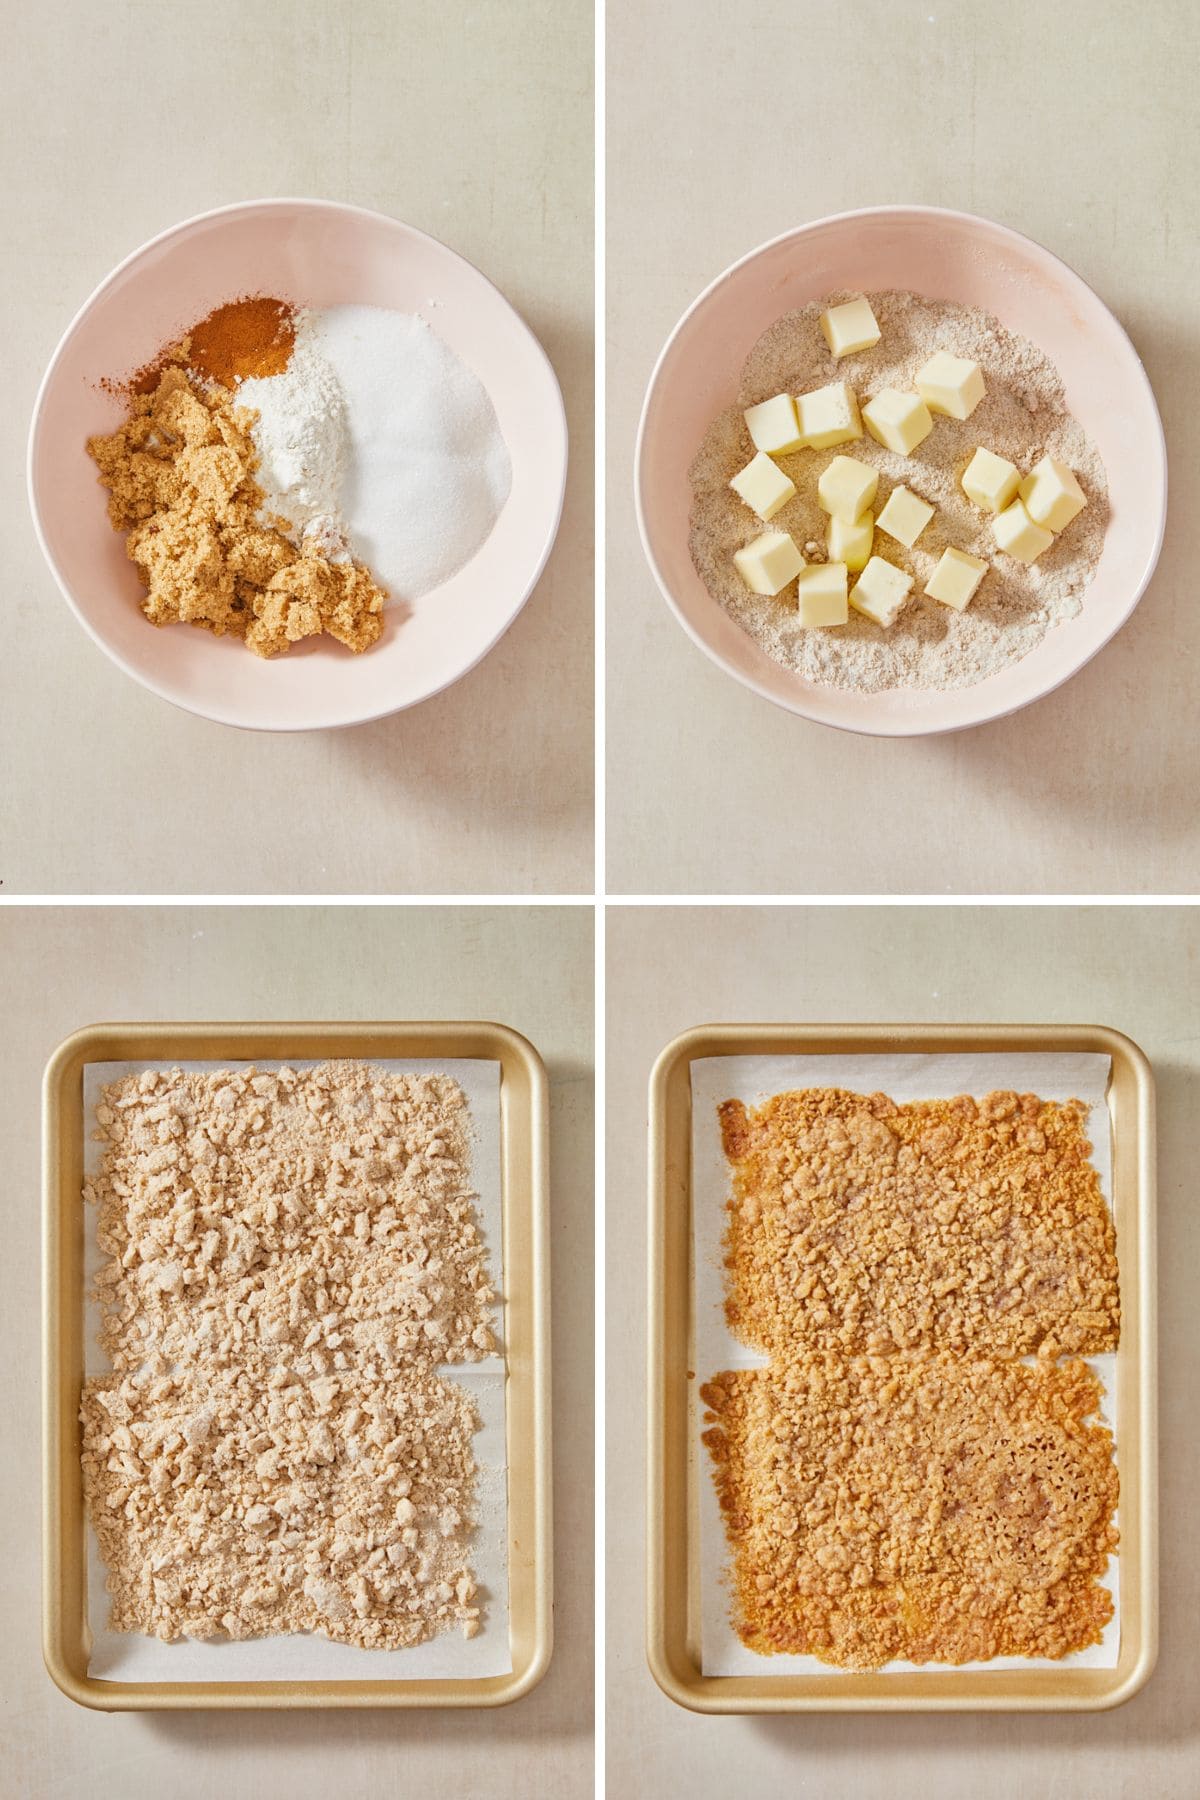 A step by step image collage on how to make the streusel for the peach cobbler pound cake with mixing the dry ingredients, adding the cubed butter, spreading the crumbs in a sheet pan, and baking them